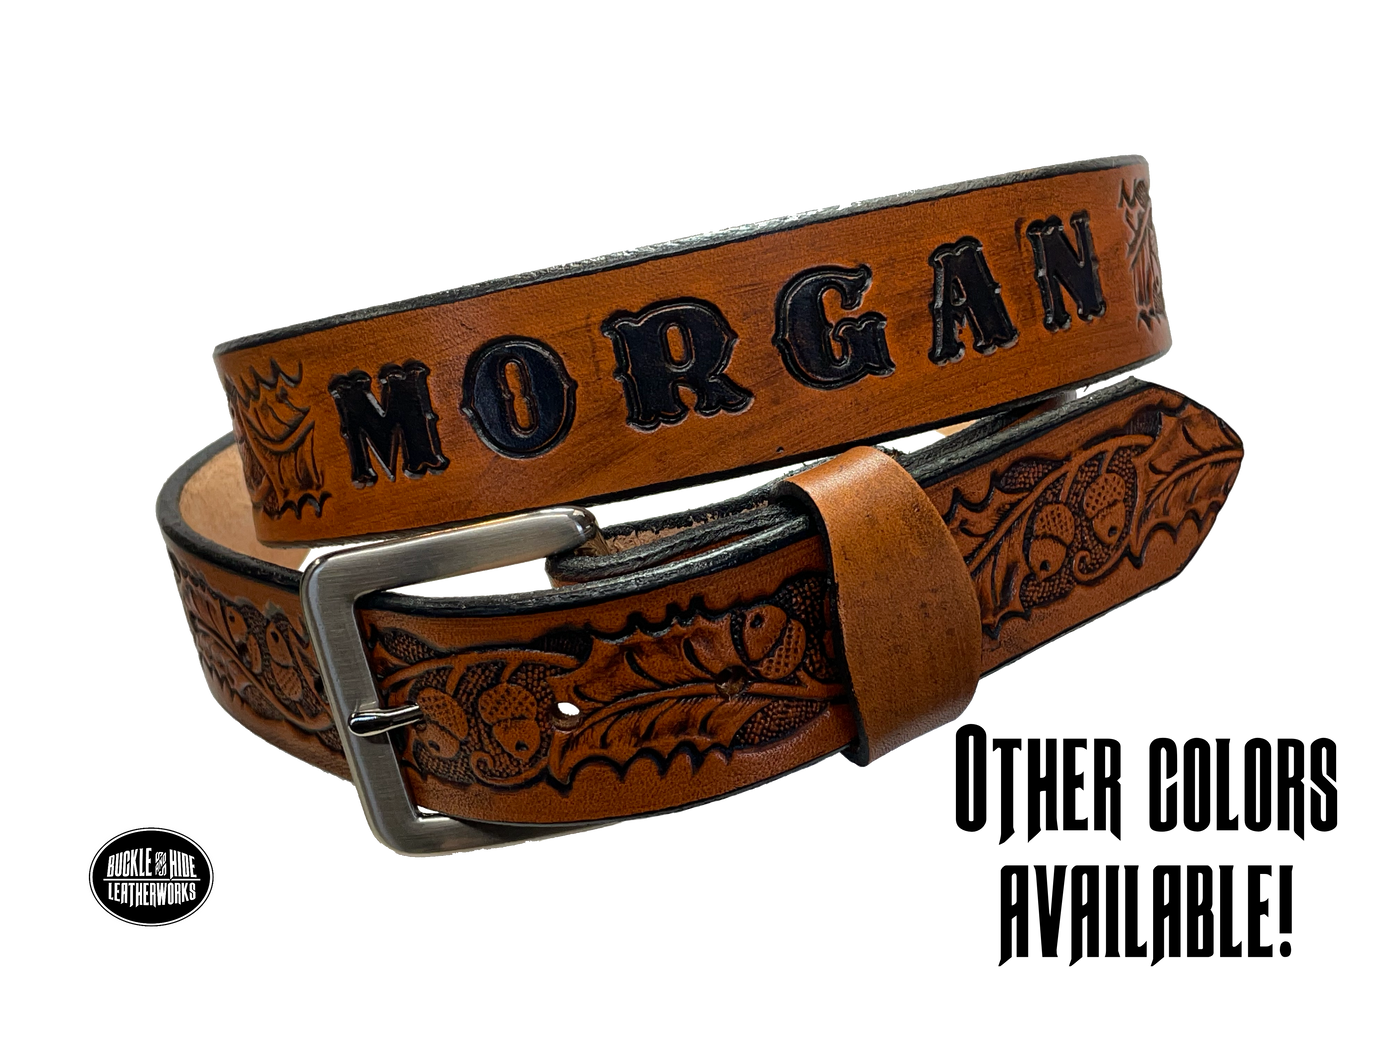 The Tall Oak Name Leather Belt is crafted from strong, high-quality Veg tan leather with an embossed Oak and Acorn pattern. Choose your finish and a name if desired. Its solid Antique nickel brass buckle is easy to change with included snaps, perfect for everyday wear. Handmade outside of Nashville in Smyrna, TN.